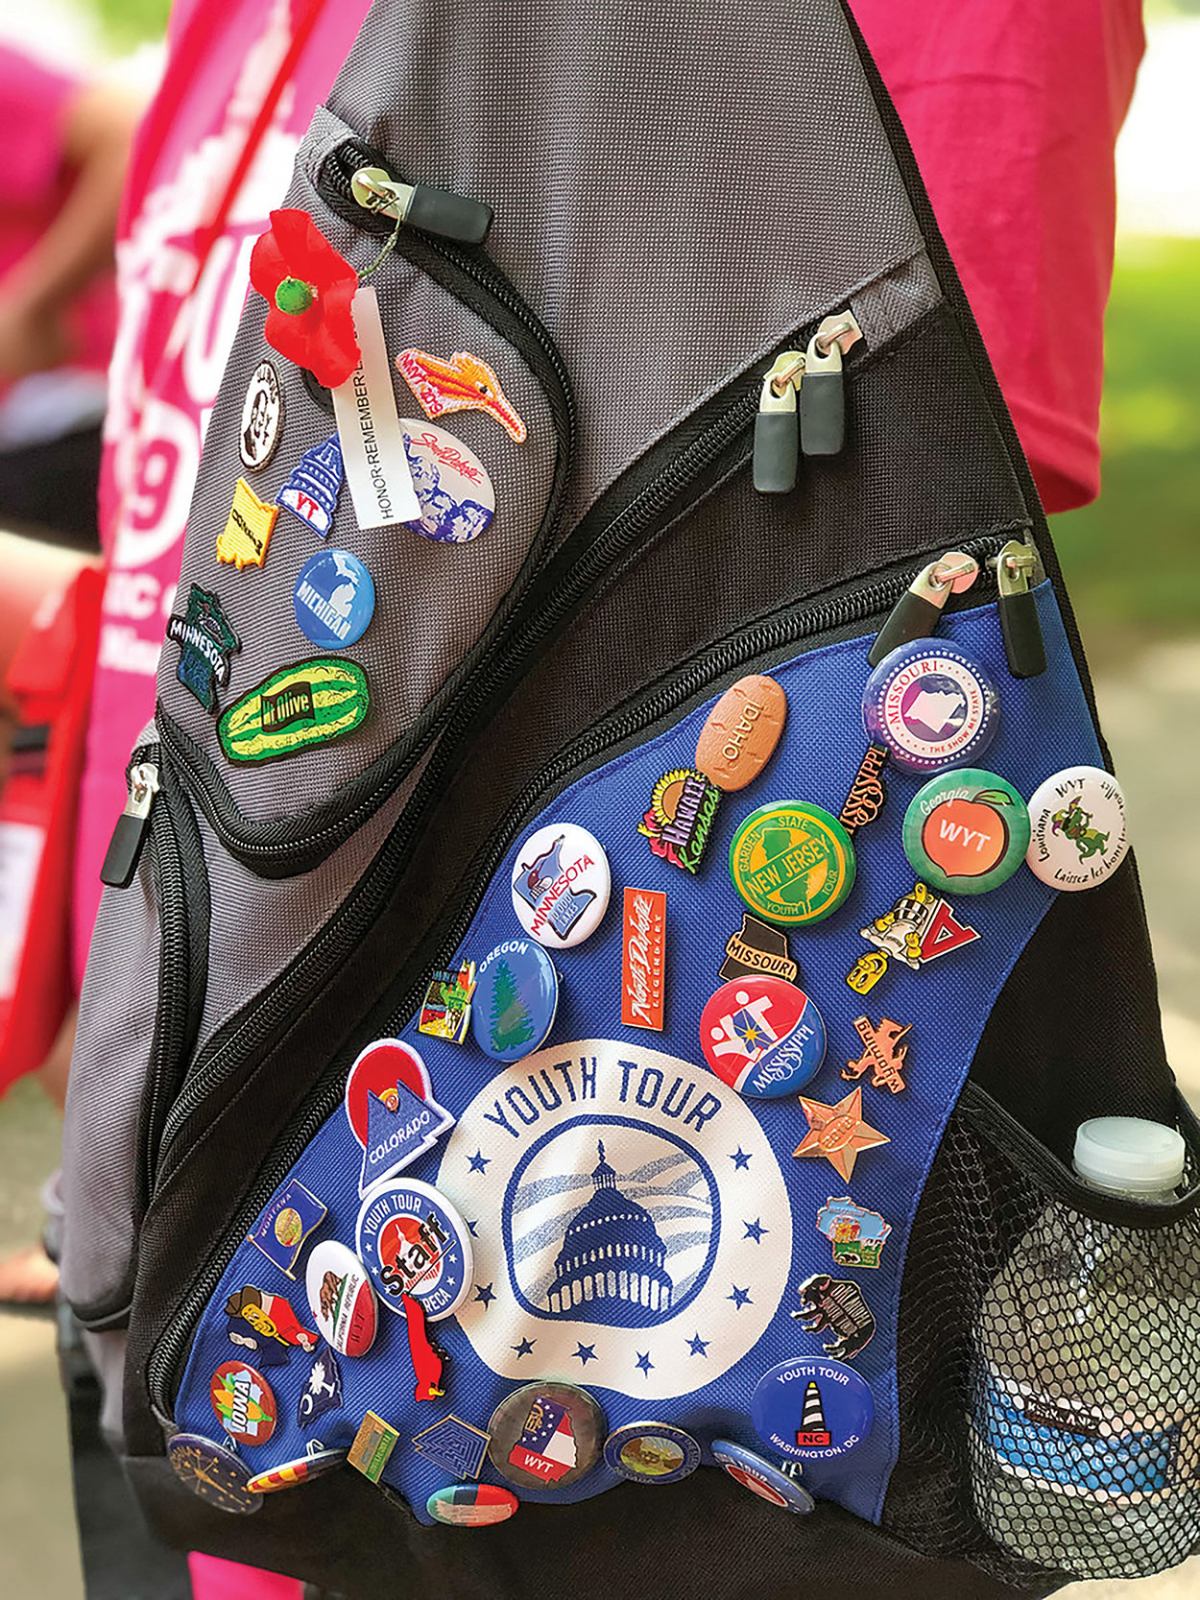 Backpack with pins on it